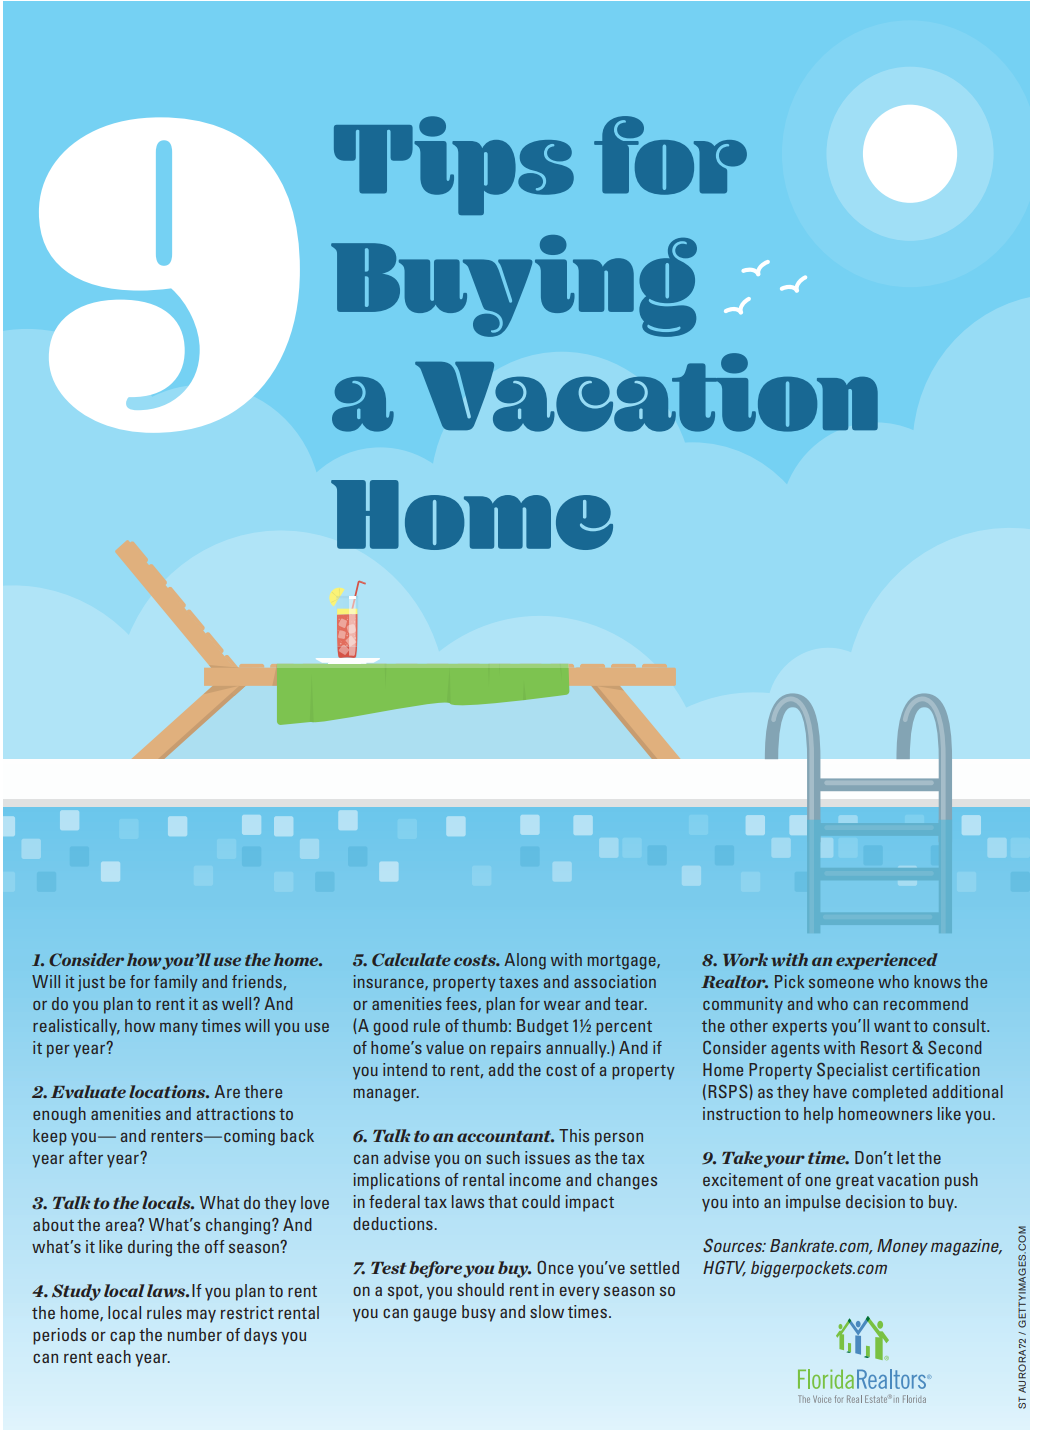 9 Tips for Buying a Vacation Home